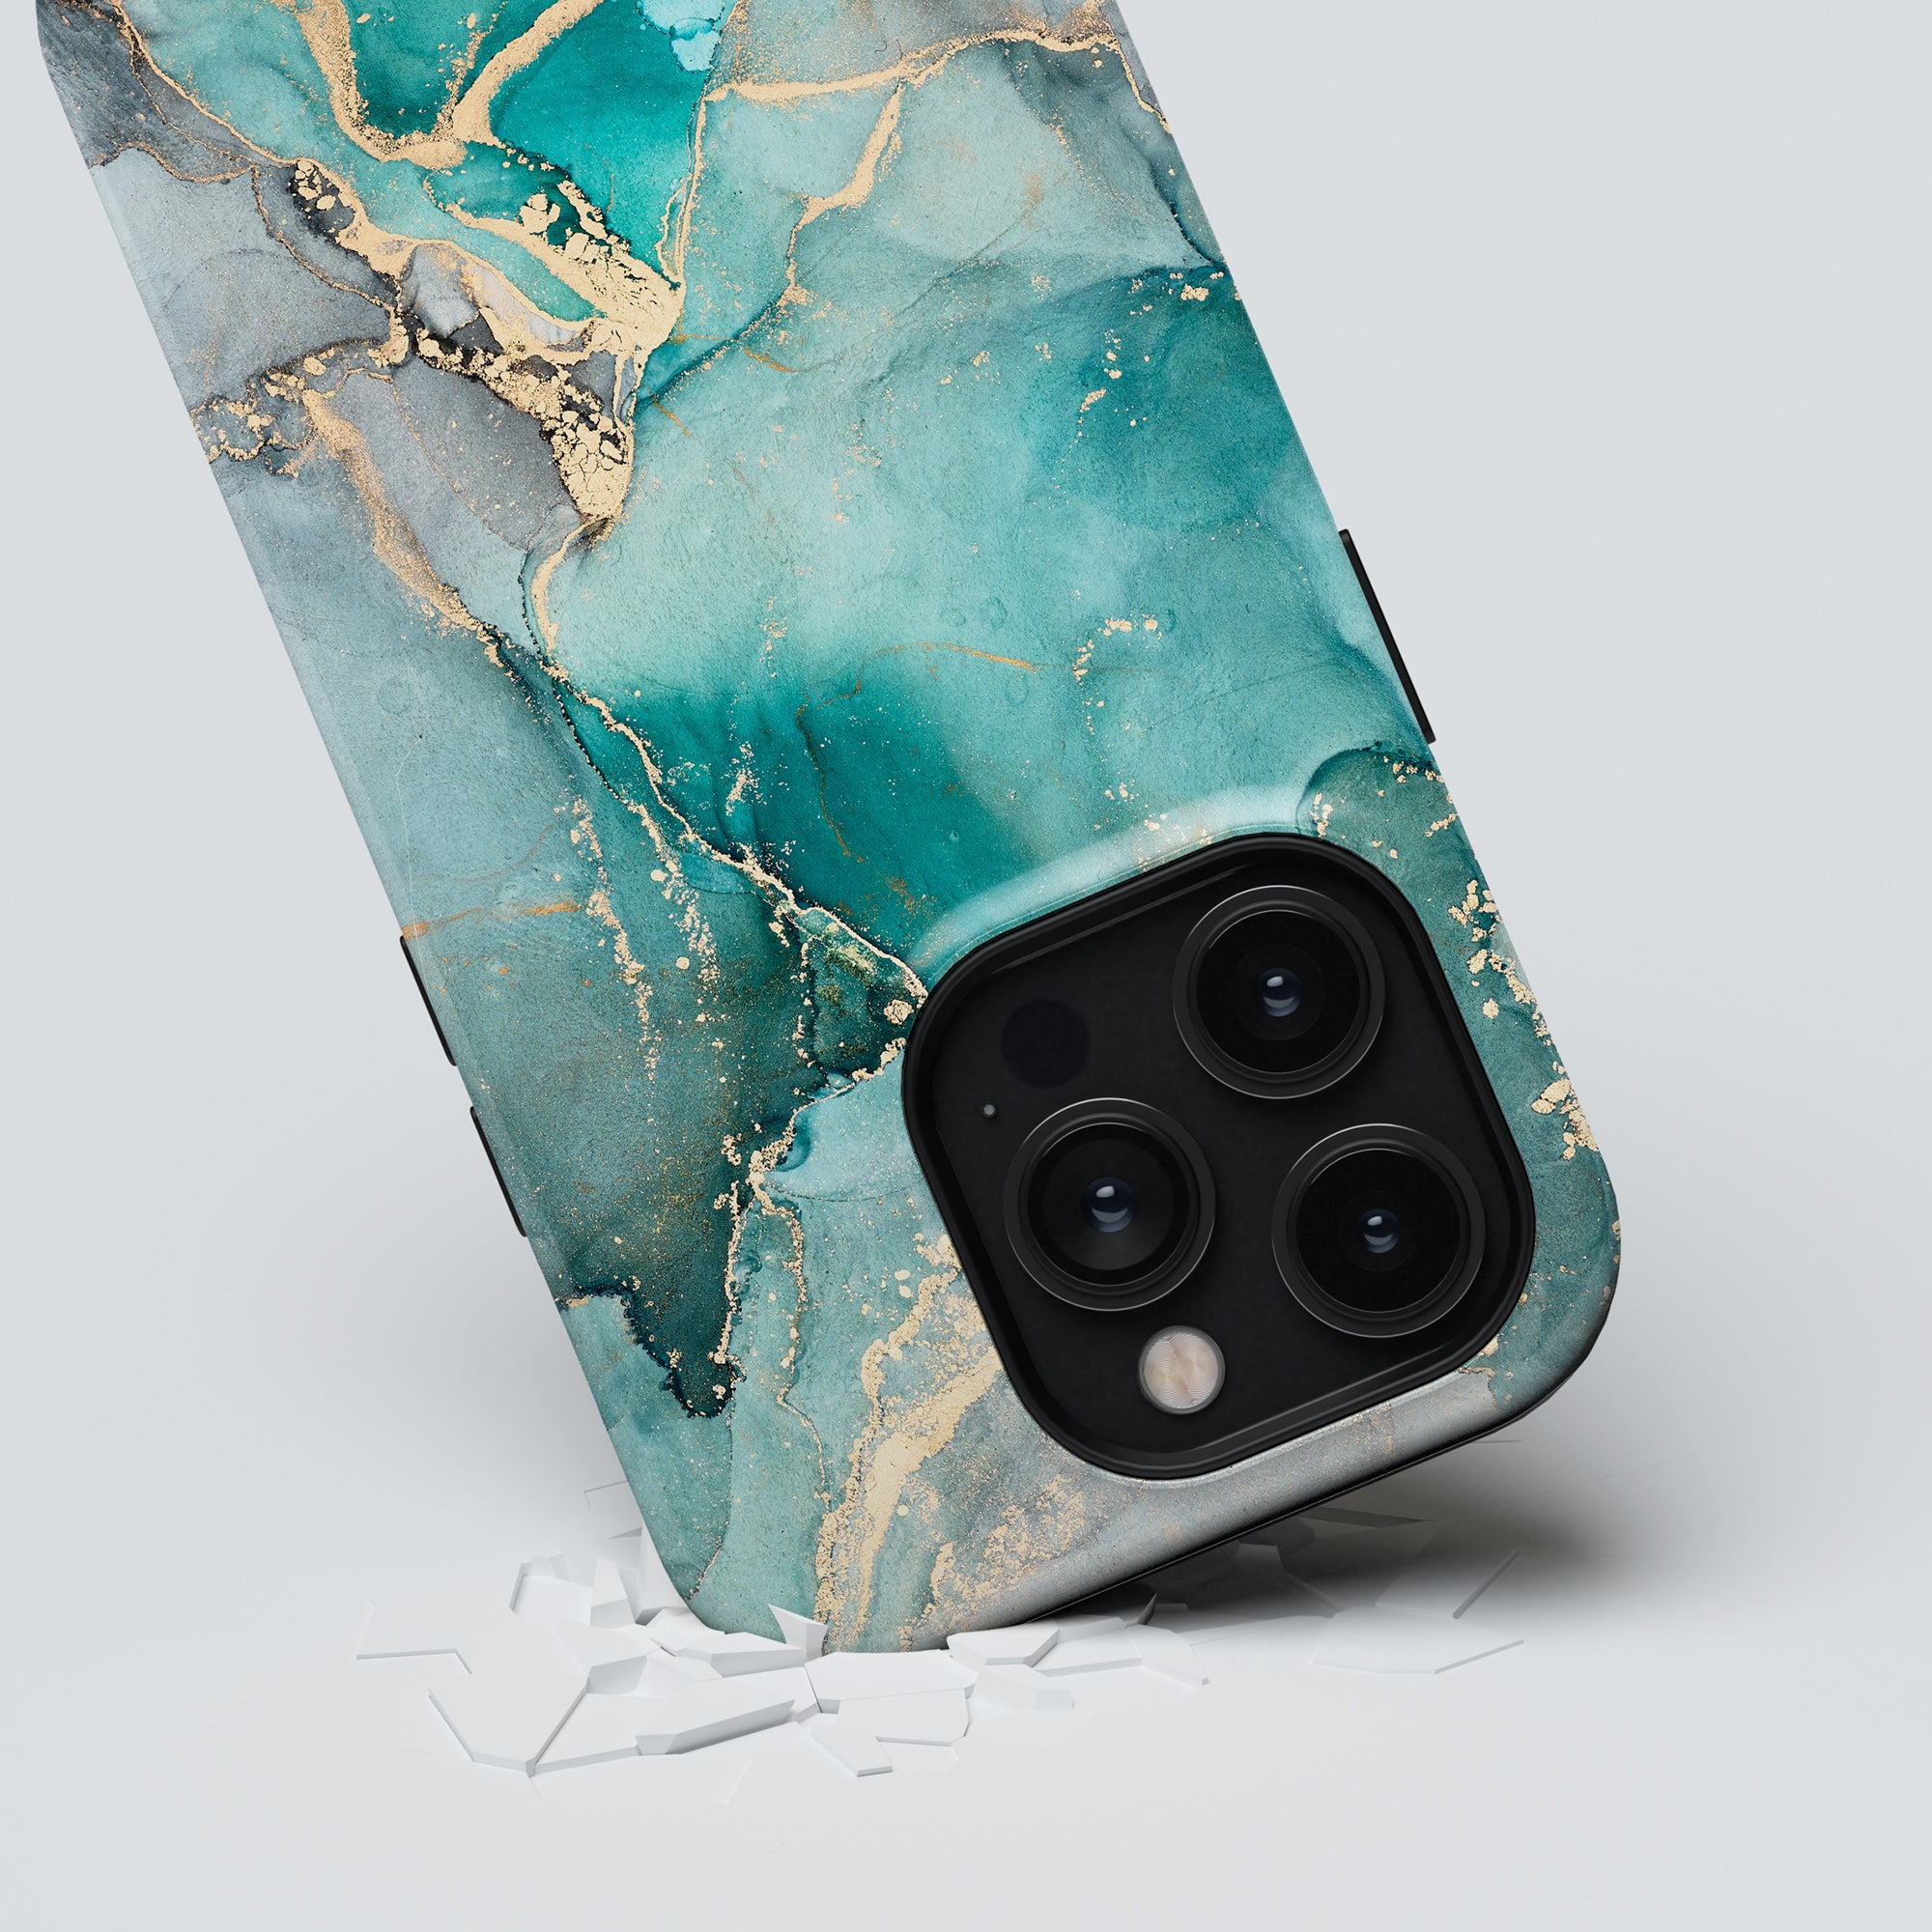 Ferozah - Tough Case with a turkos marmor and gold marbled case breaking through a white surface, showcasing its triple-lens camera system.